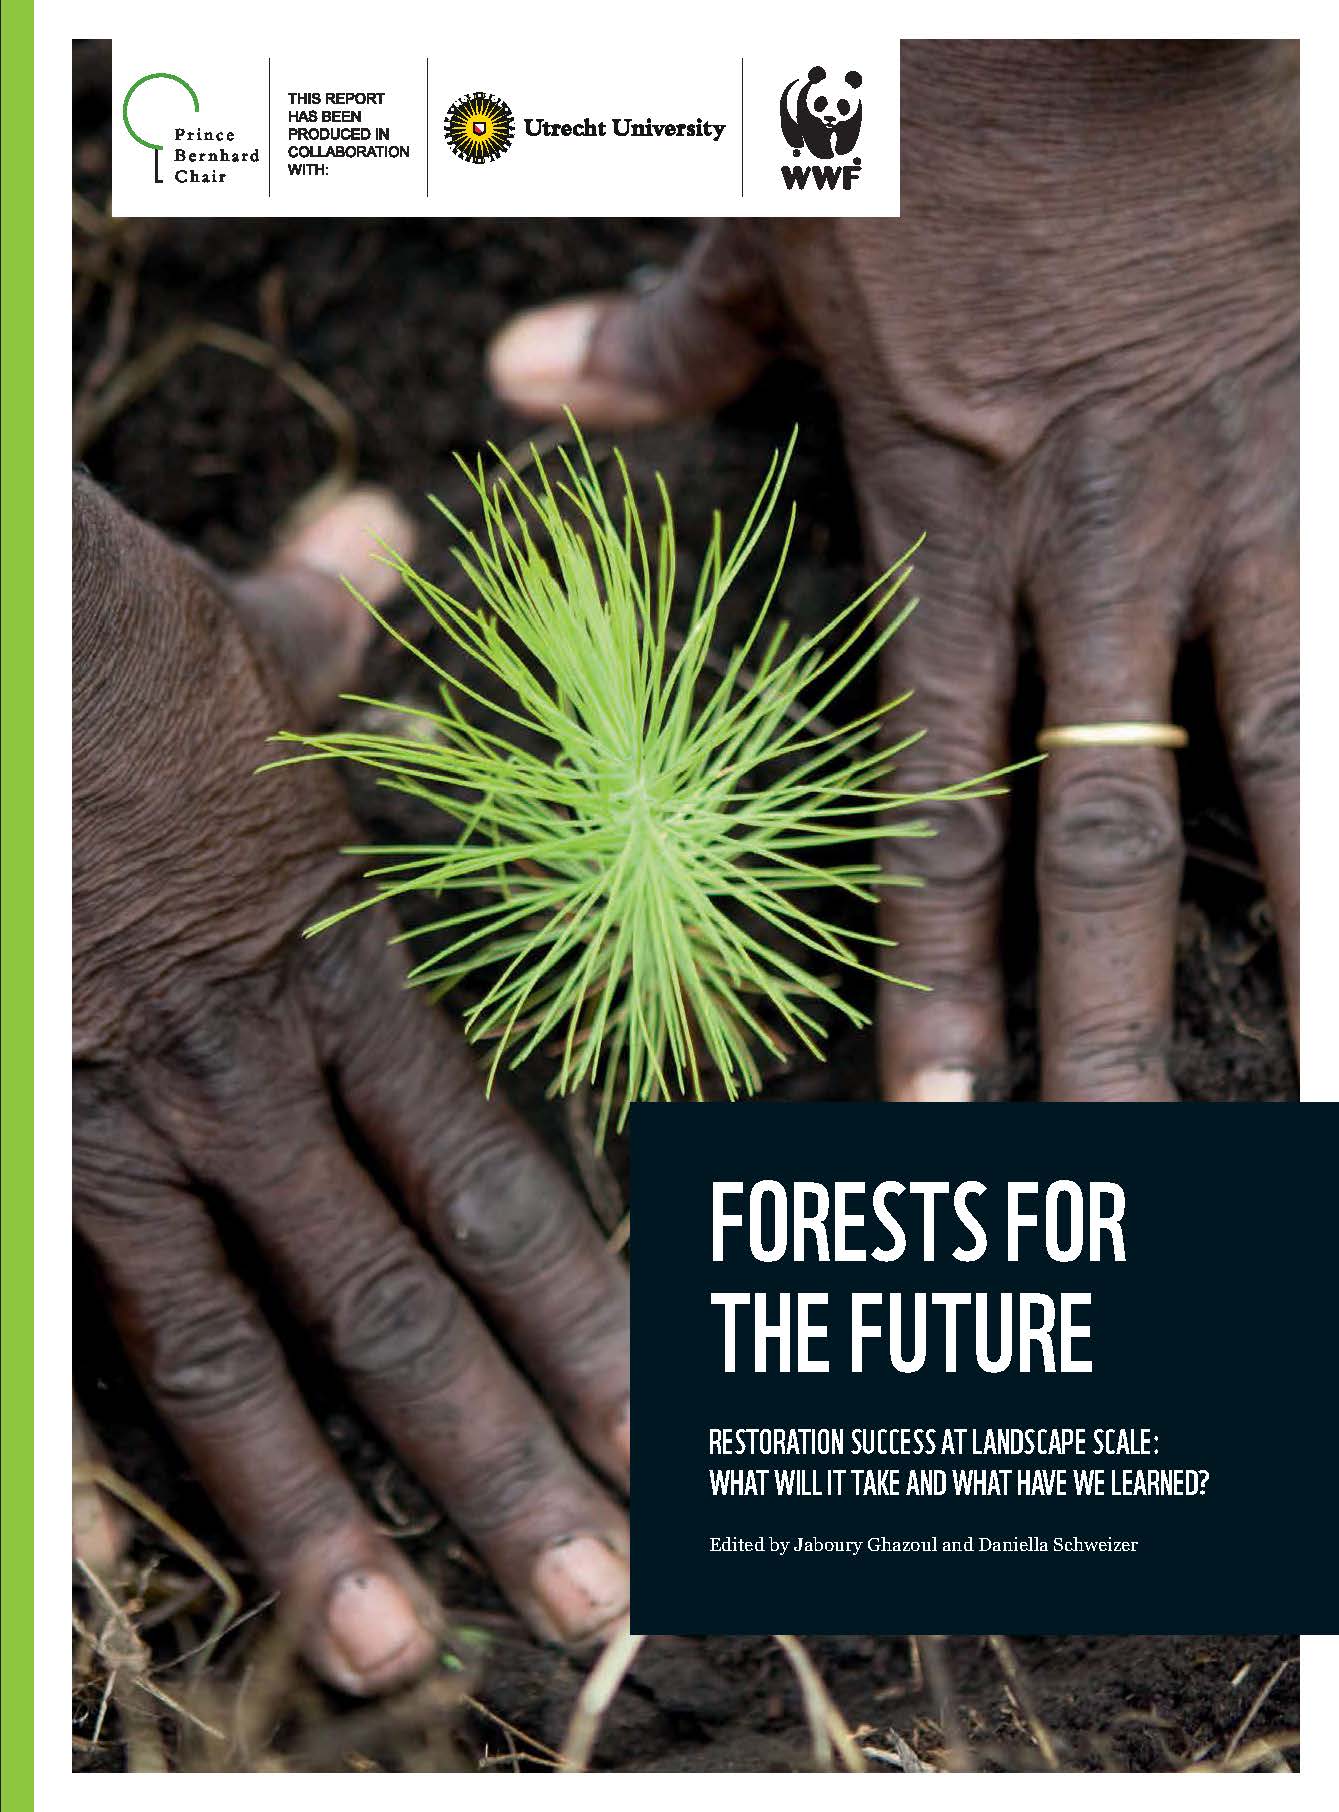 Close-up shot of hands planting a seedling. Includes the title text, "Forests for the Future: Restoration Success at Landscape Scale: What will it take and what have we learned?"